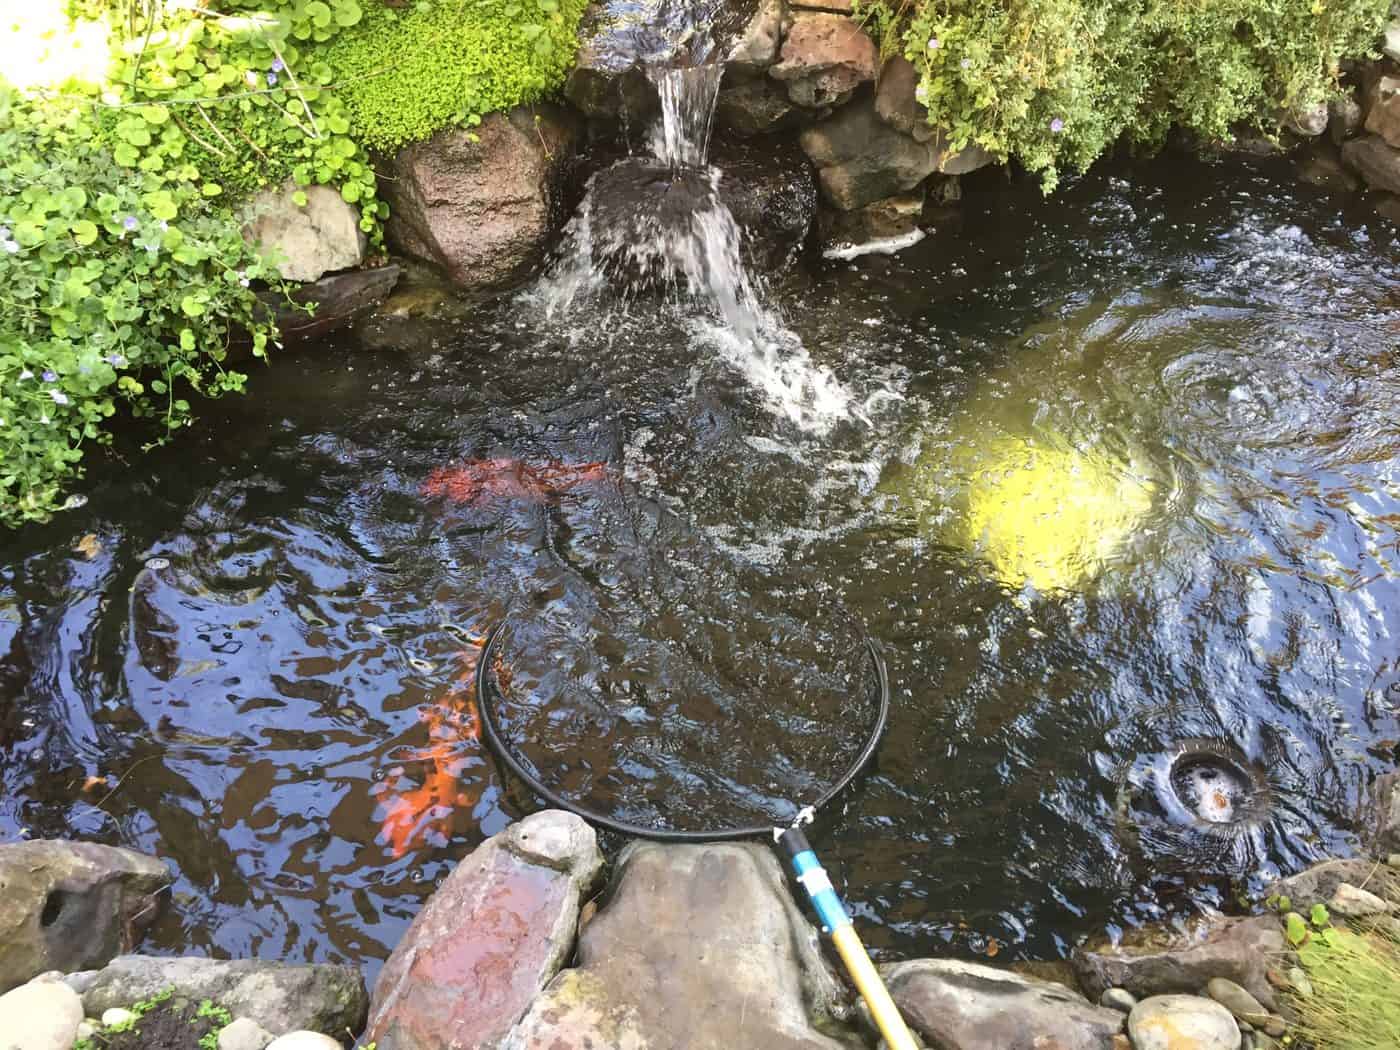 What fish do you put in a fish pond and why?